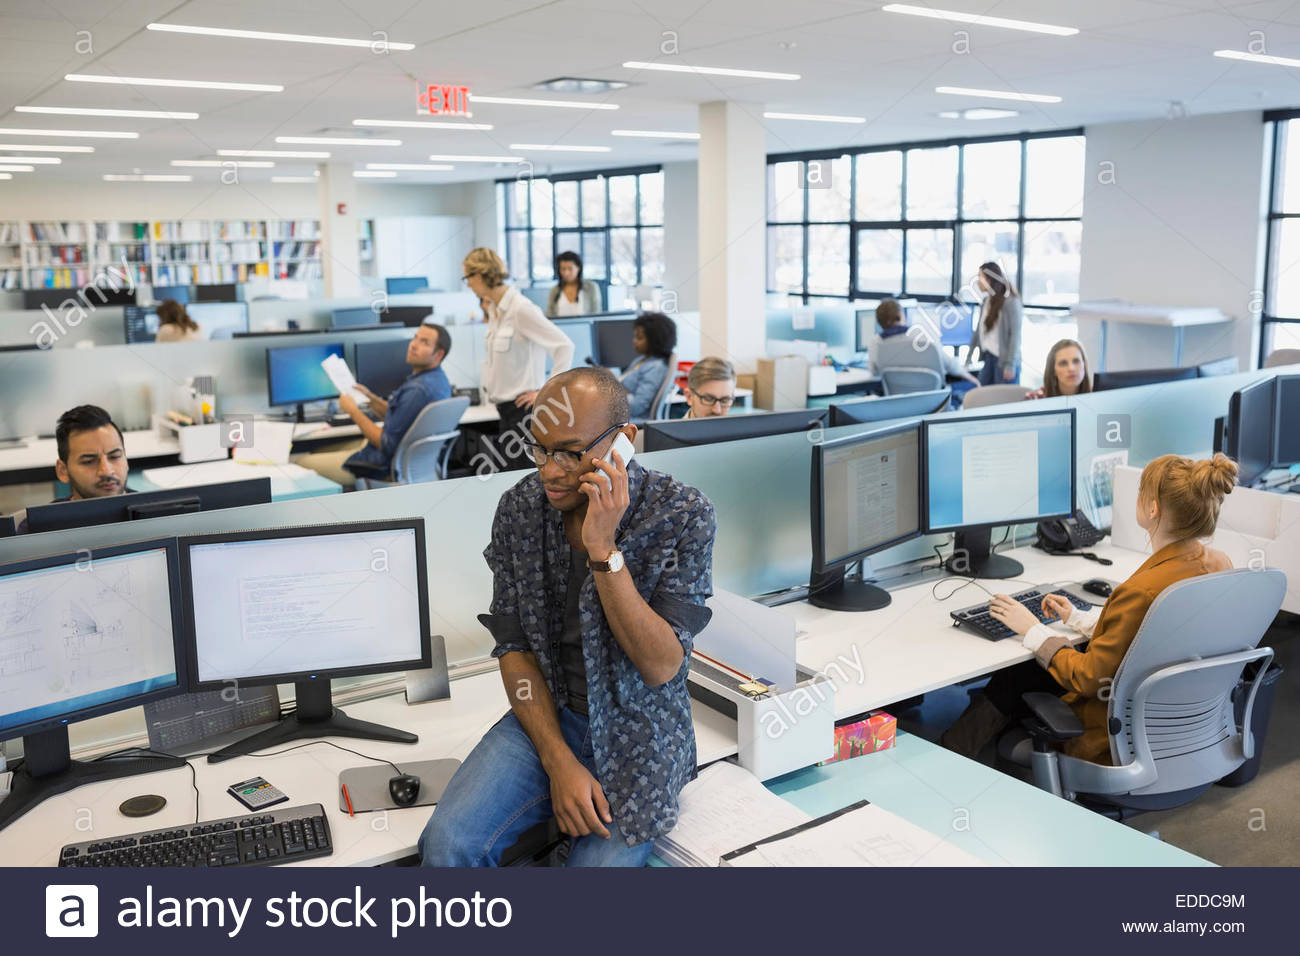 Business people working in open office Stock Photo